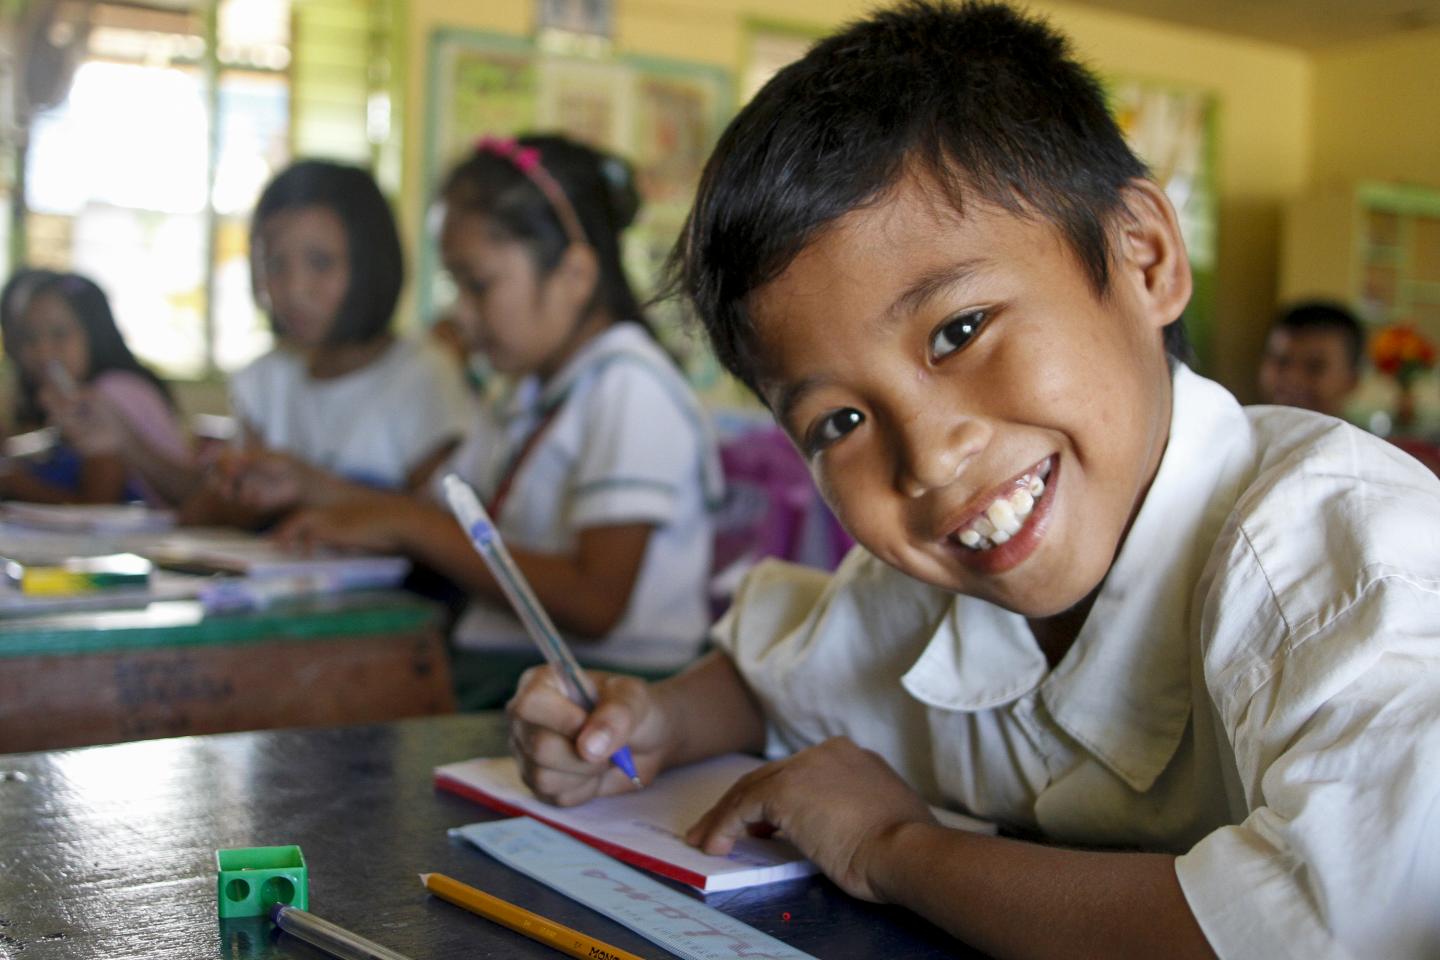 alternative education programs in the philippines